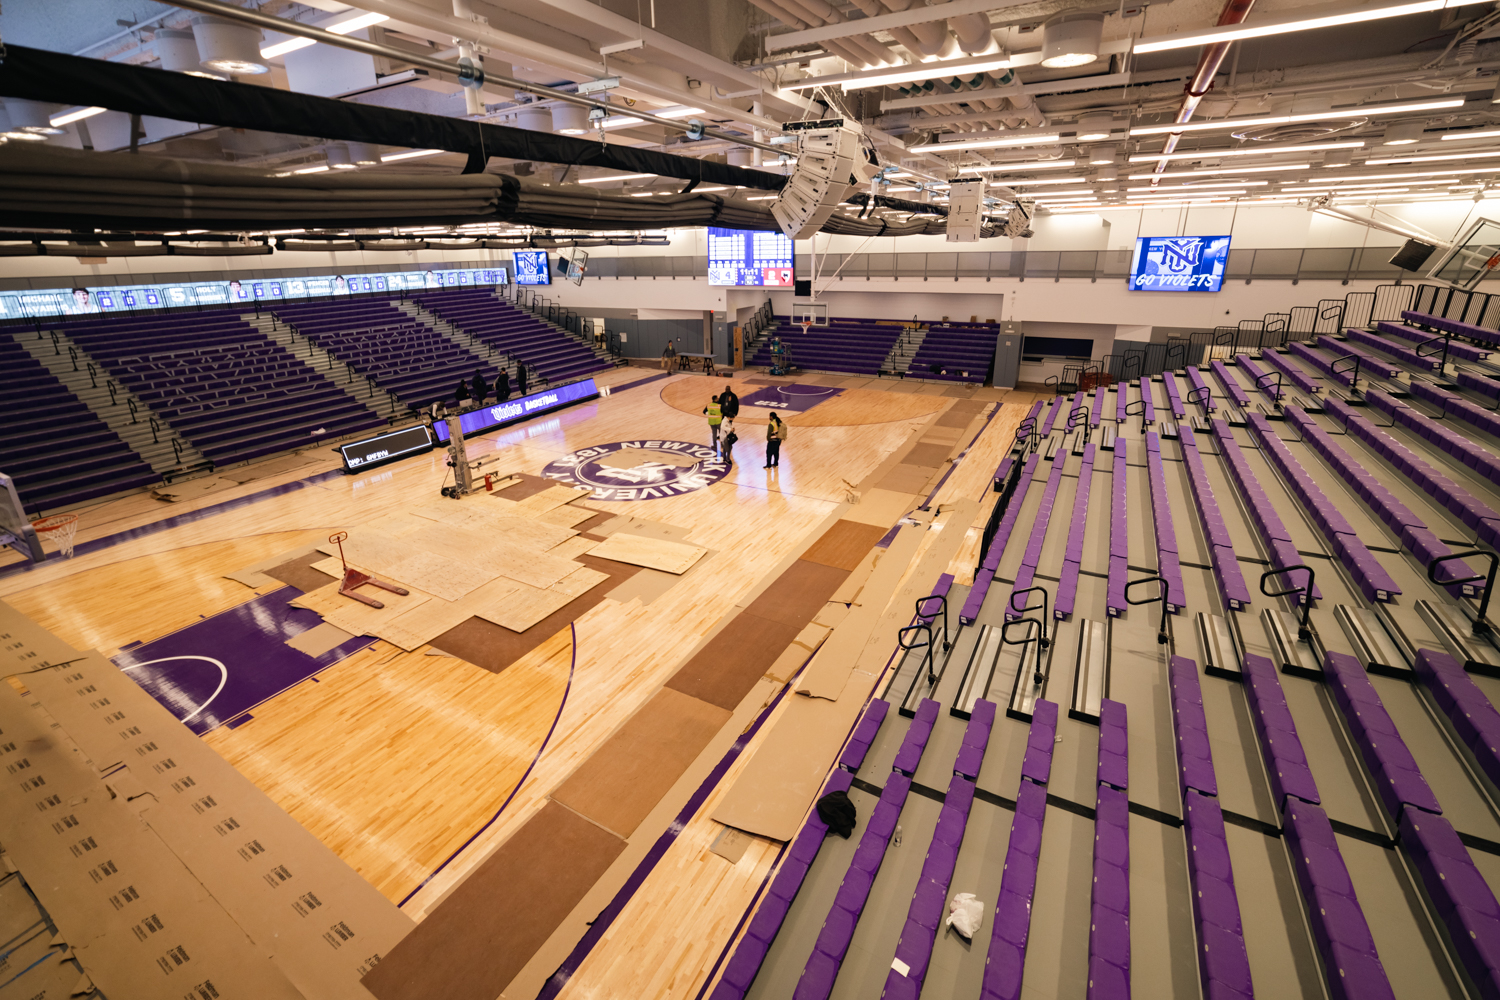 An indoor basketball court with white walls and two grandstands with purple seats on the two sides. The floor is partially covered with cardboard. Screens on the wall are displaying the logo of New York University’s athletic teams.